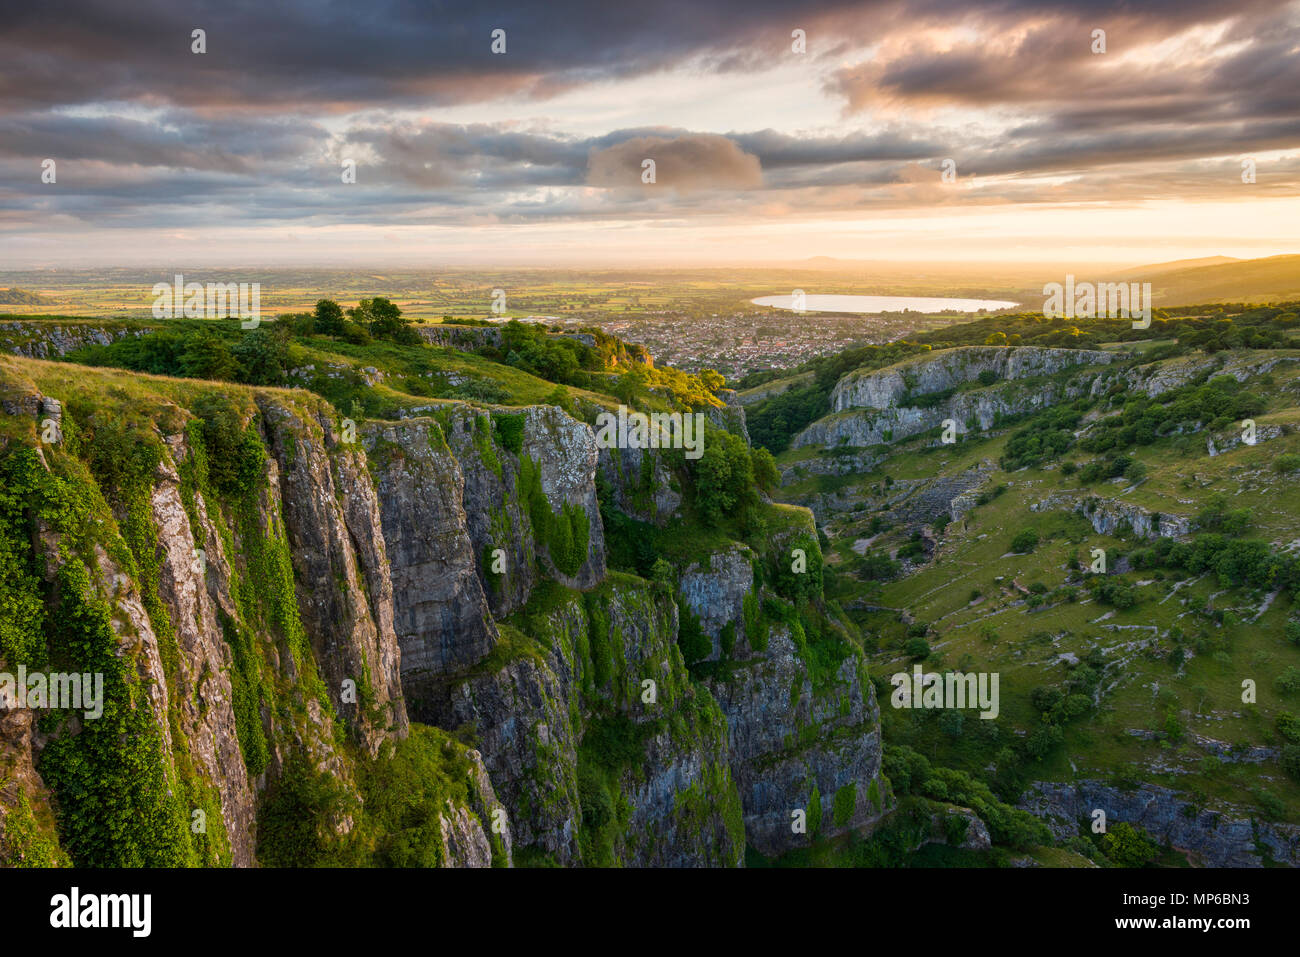 View over Cheddar Gorge and the village of Cheddar on the southern edge of the Mendip Hills, Somerset, England. Stock Photo